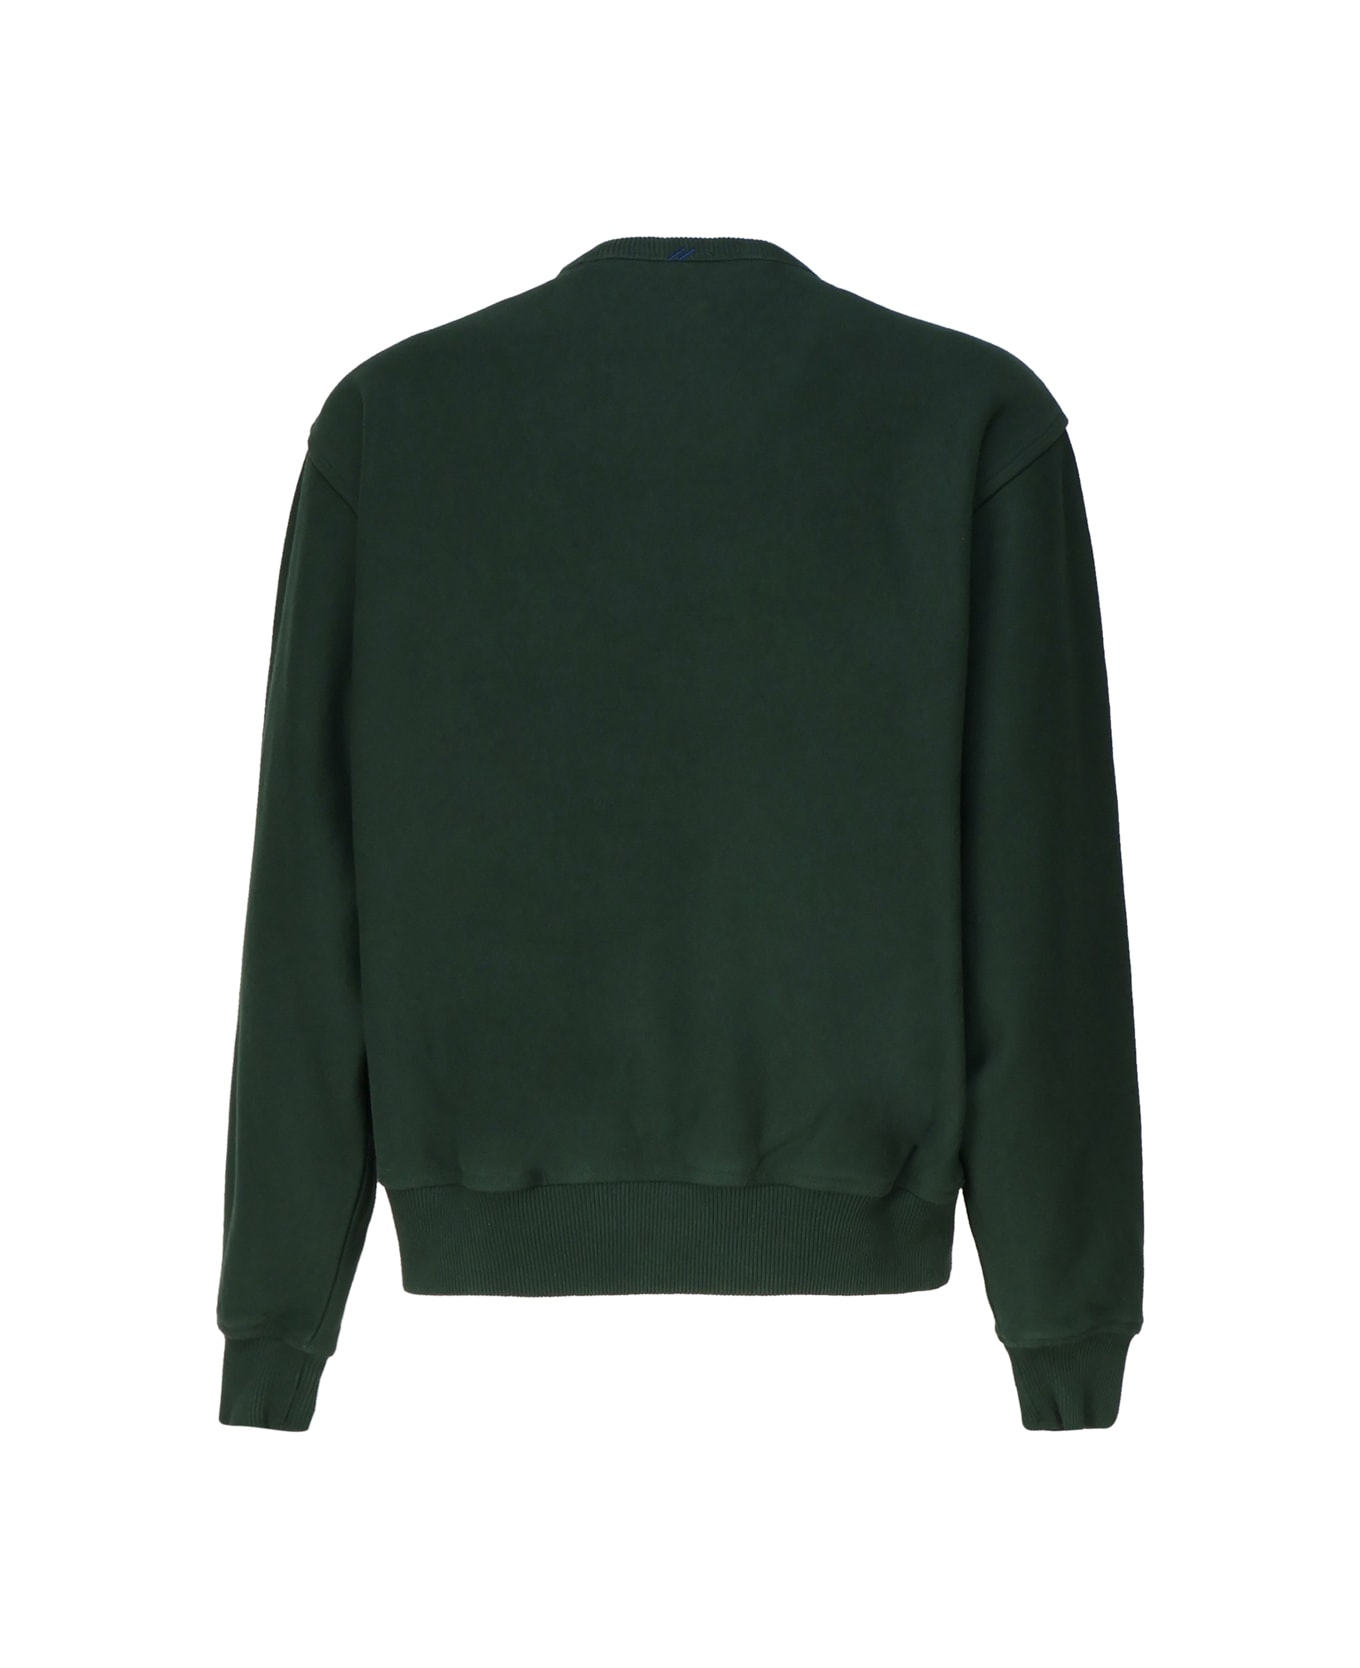 Burberry Logo Embroidered Ribbed Sweatshirt - Ivy